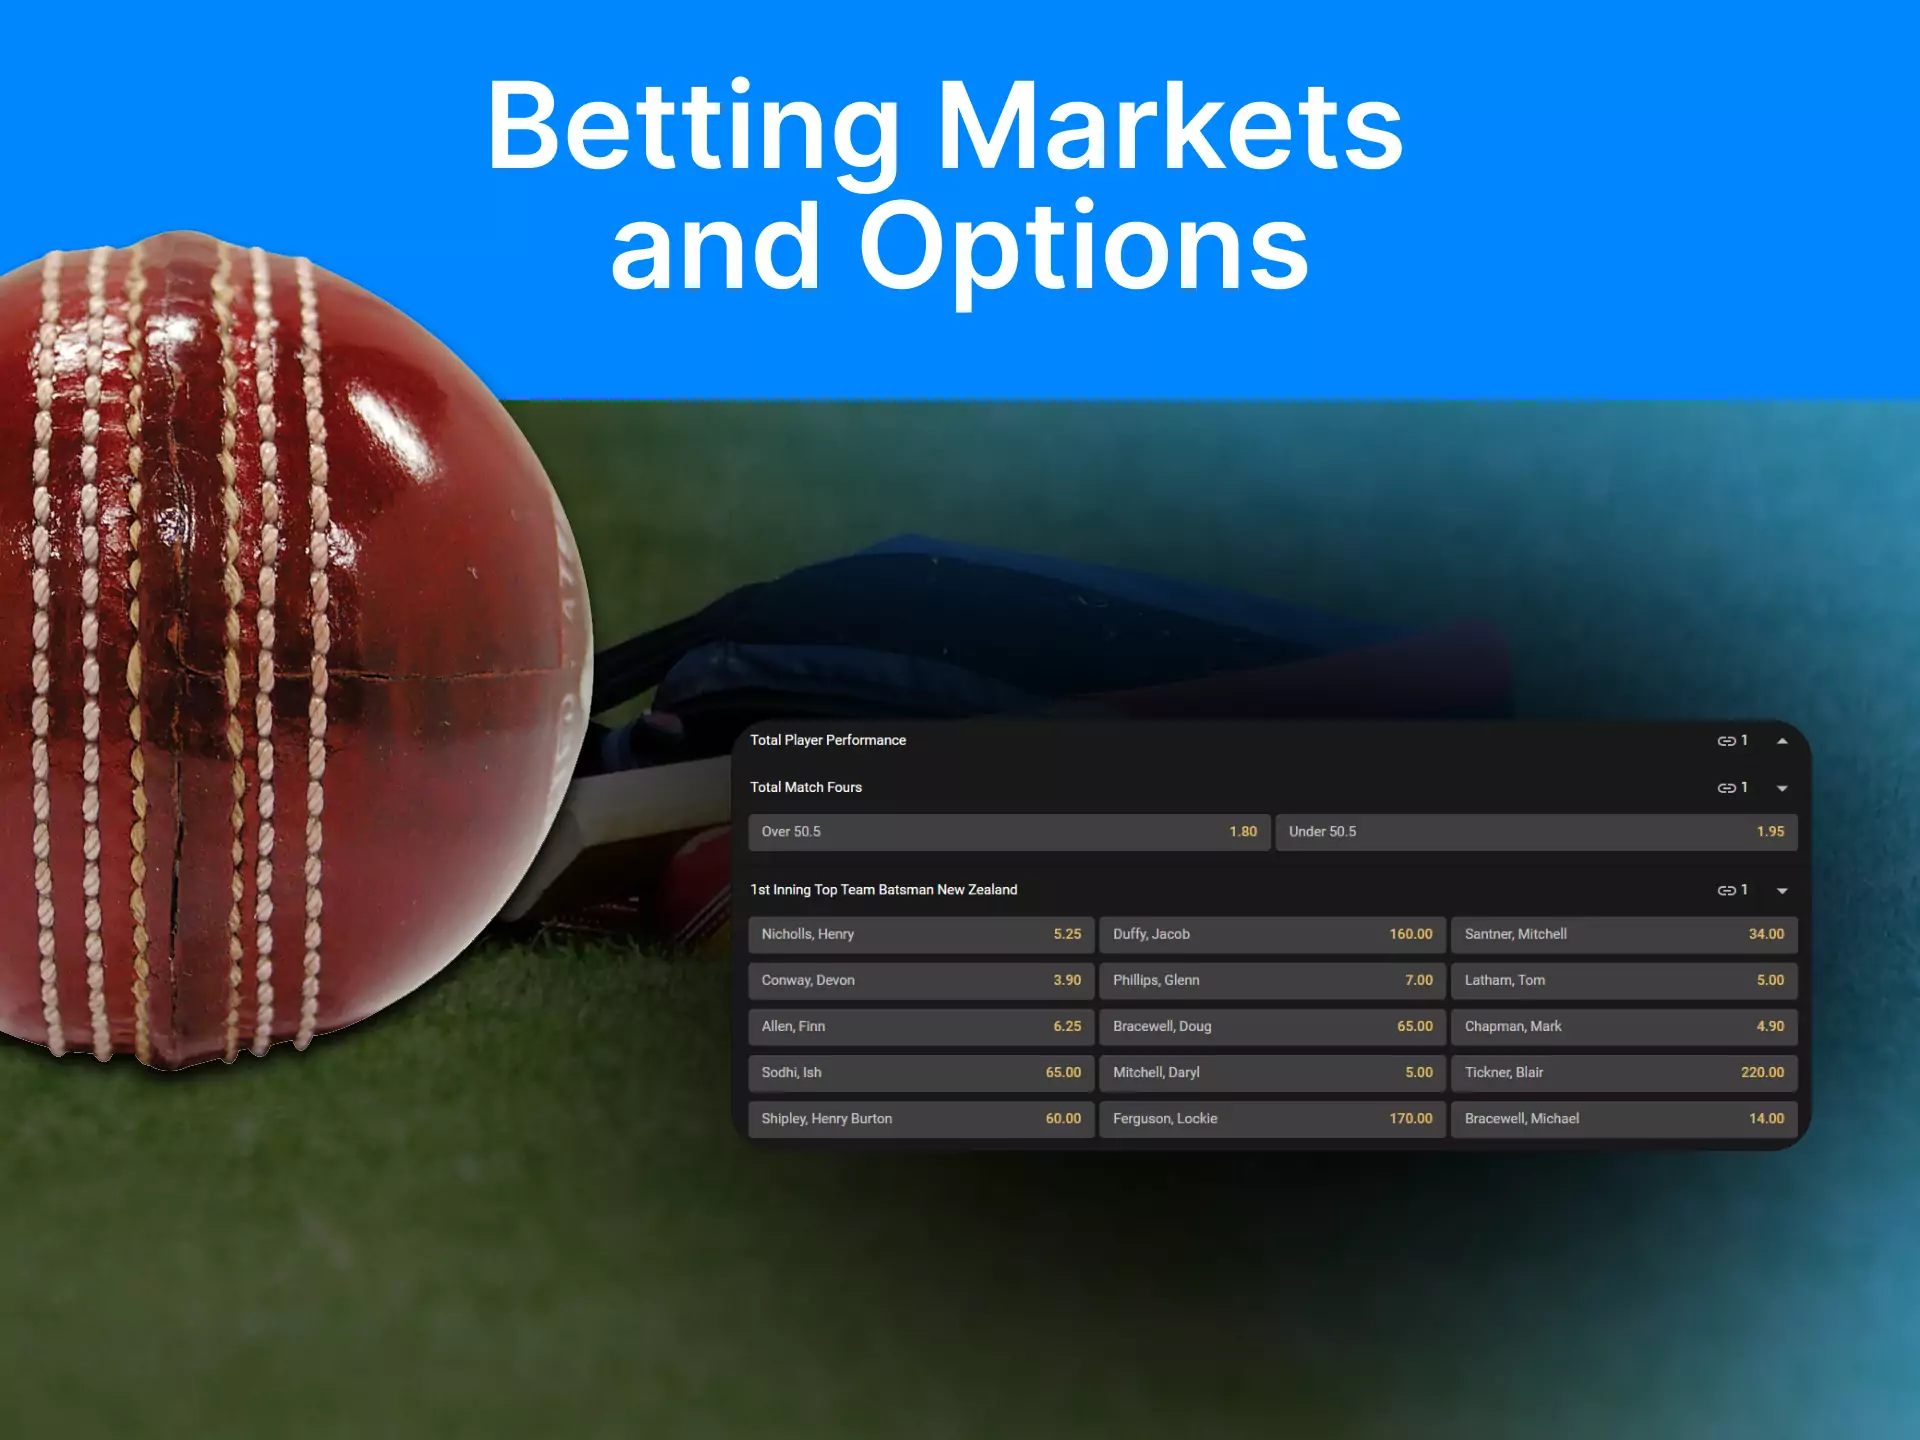 Learn more about the markets you can bet on and their options.